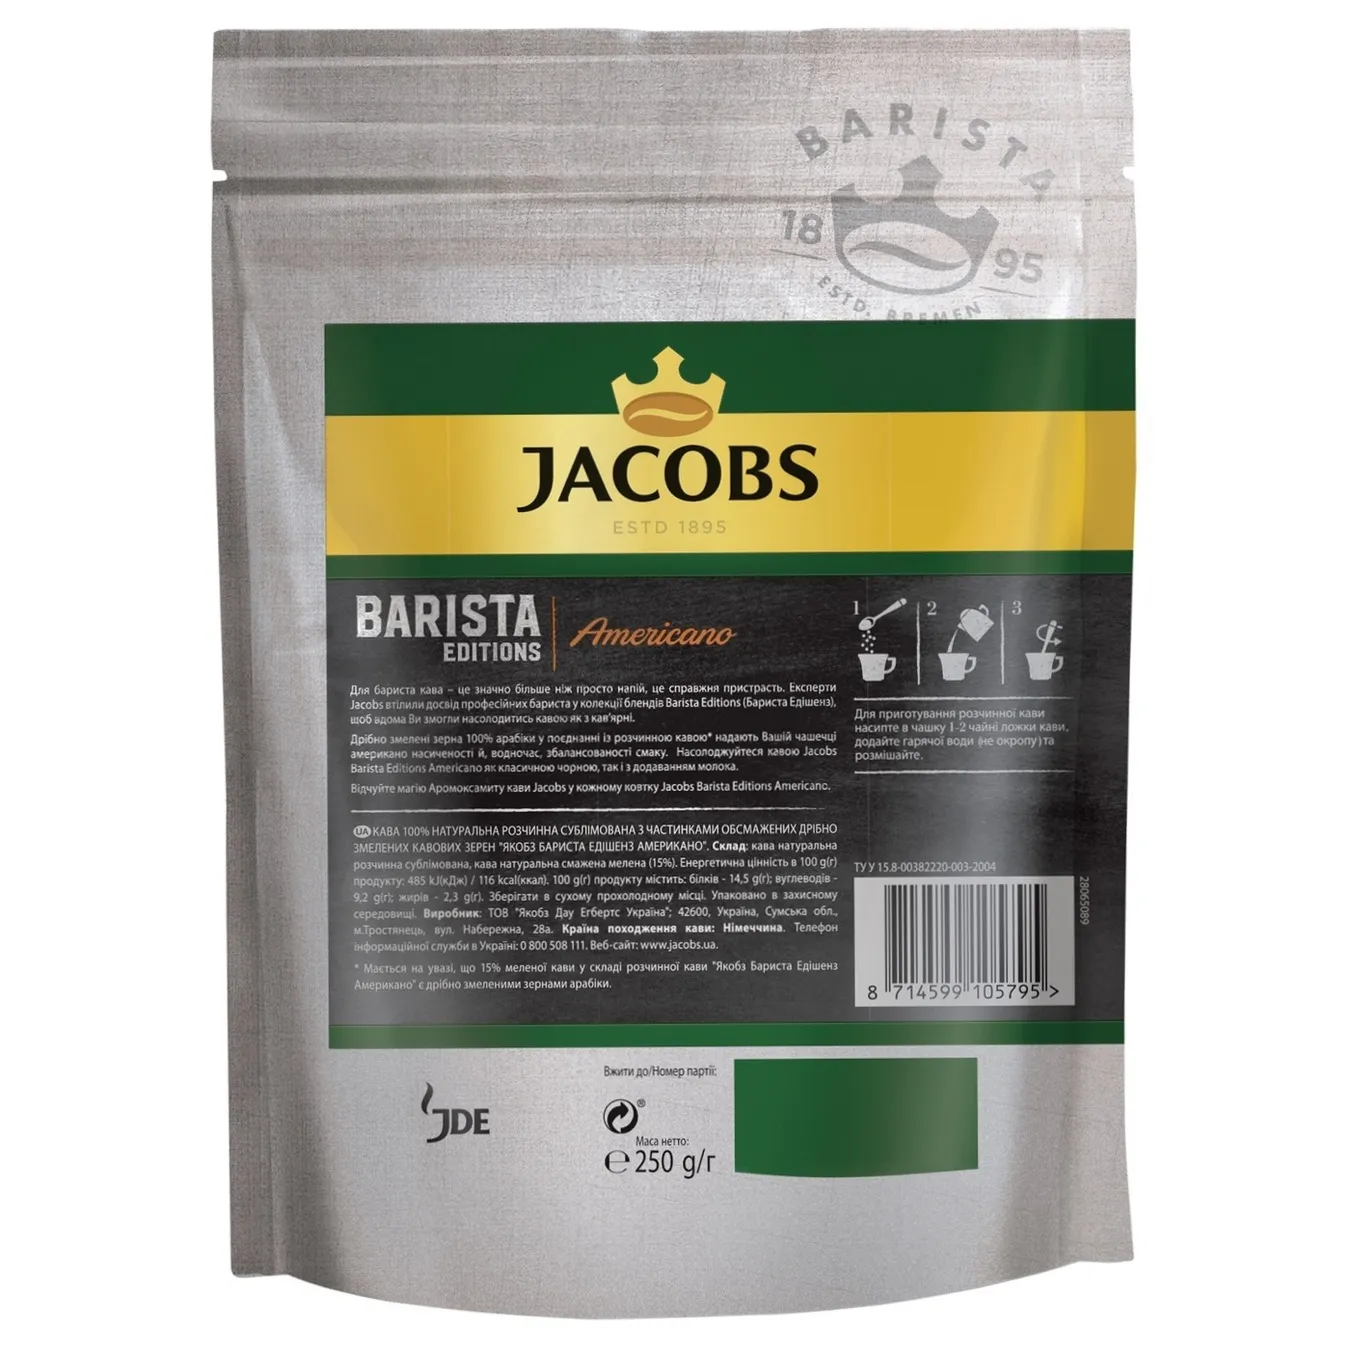 Coffee Jacobs Barista Editions Americano soluble promotion 250g 2